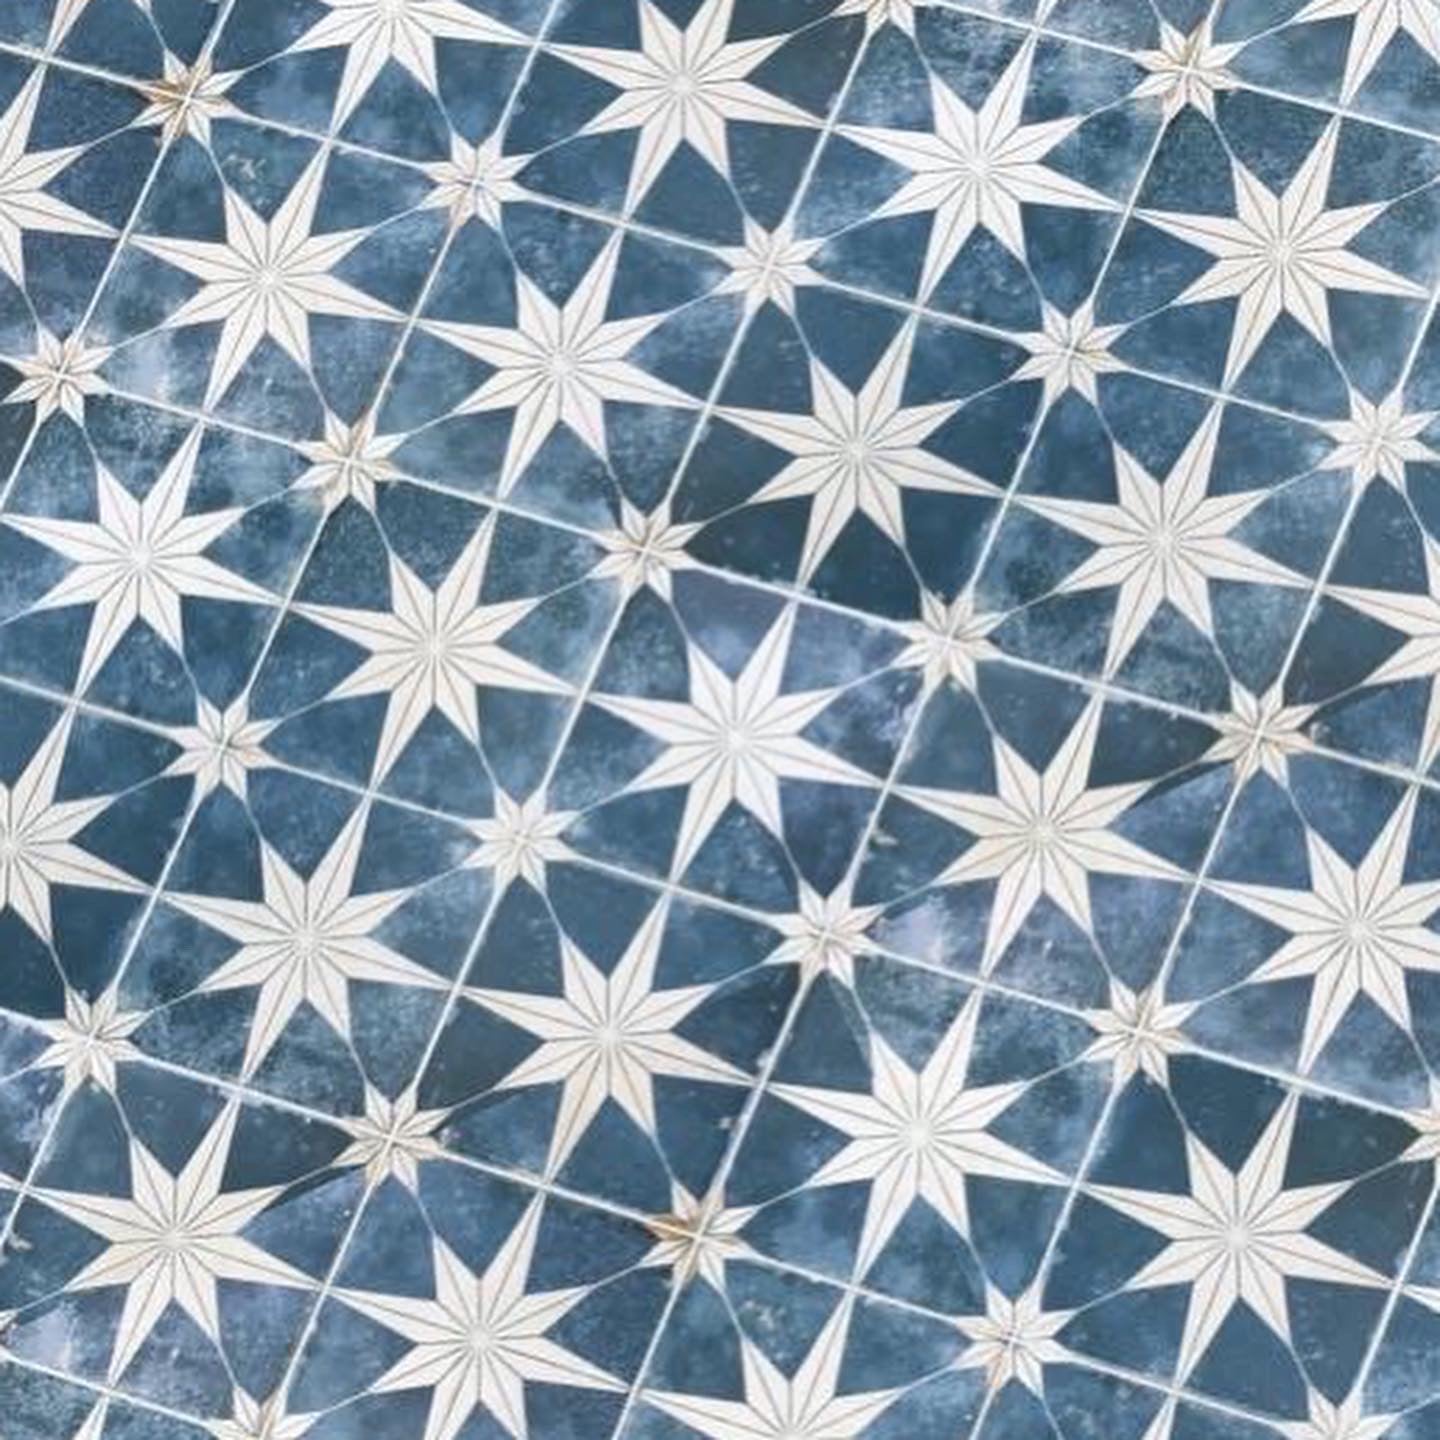 Blue and White Star Paper Tile